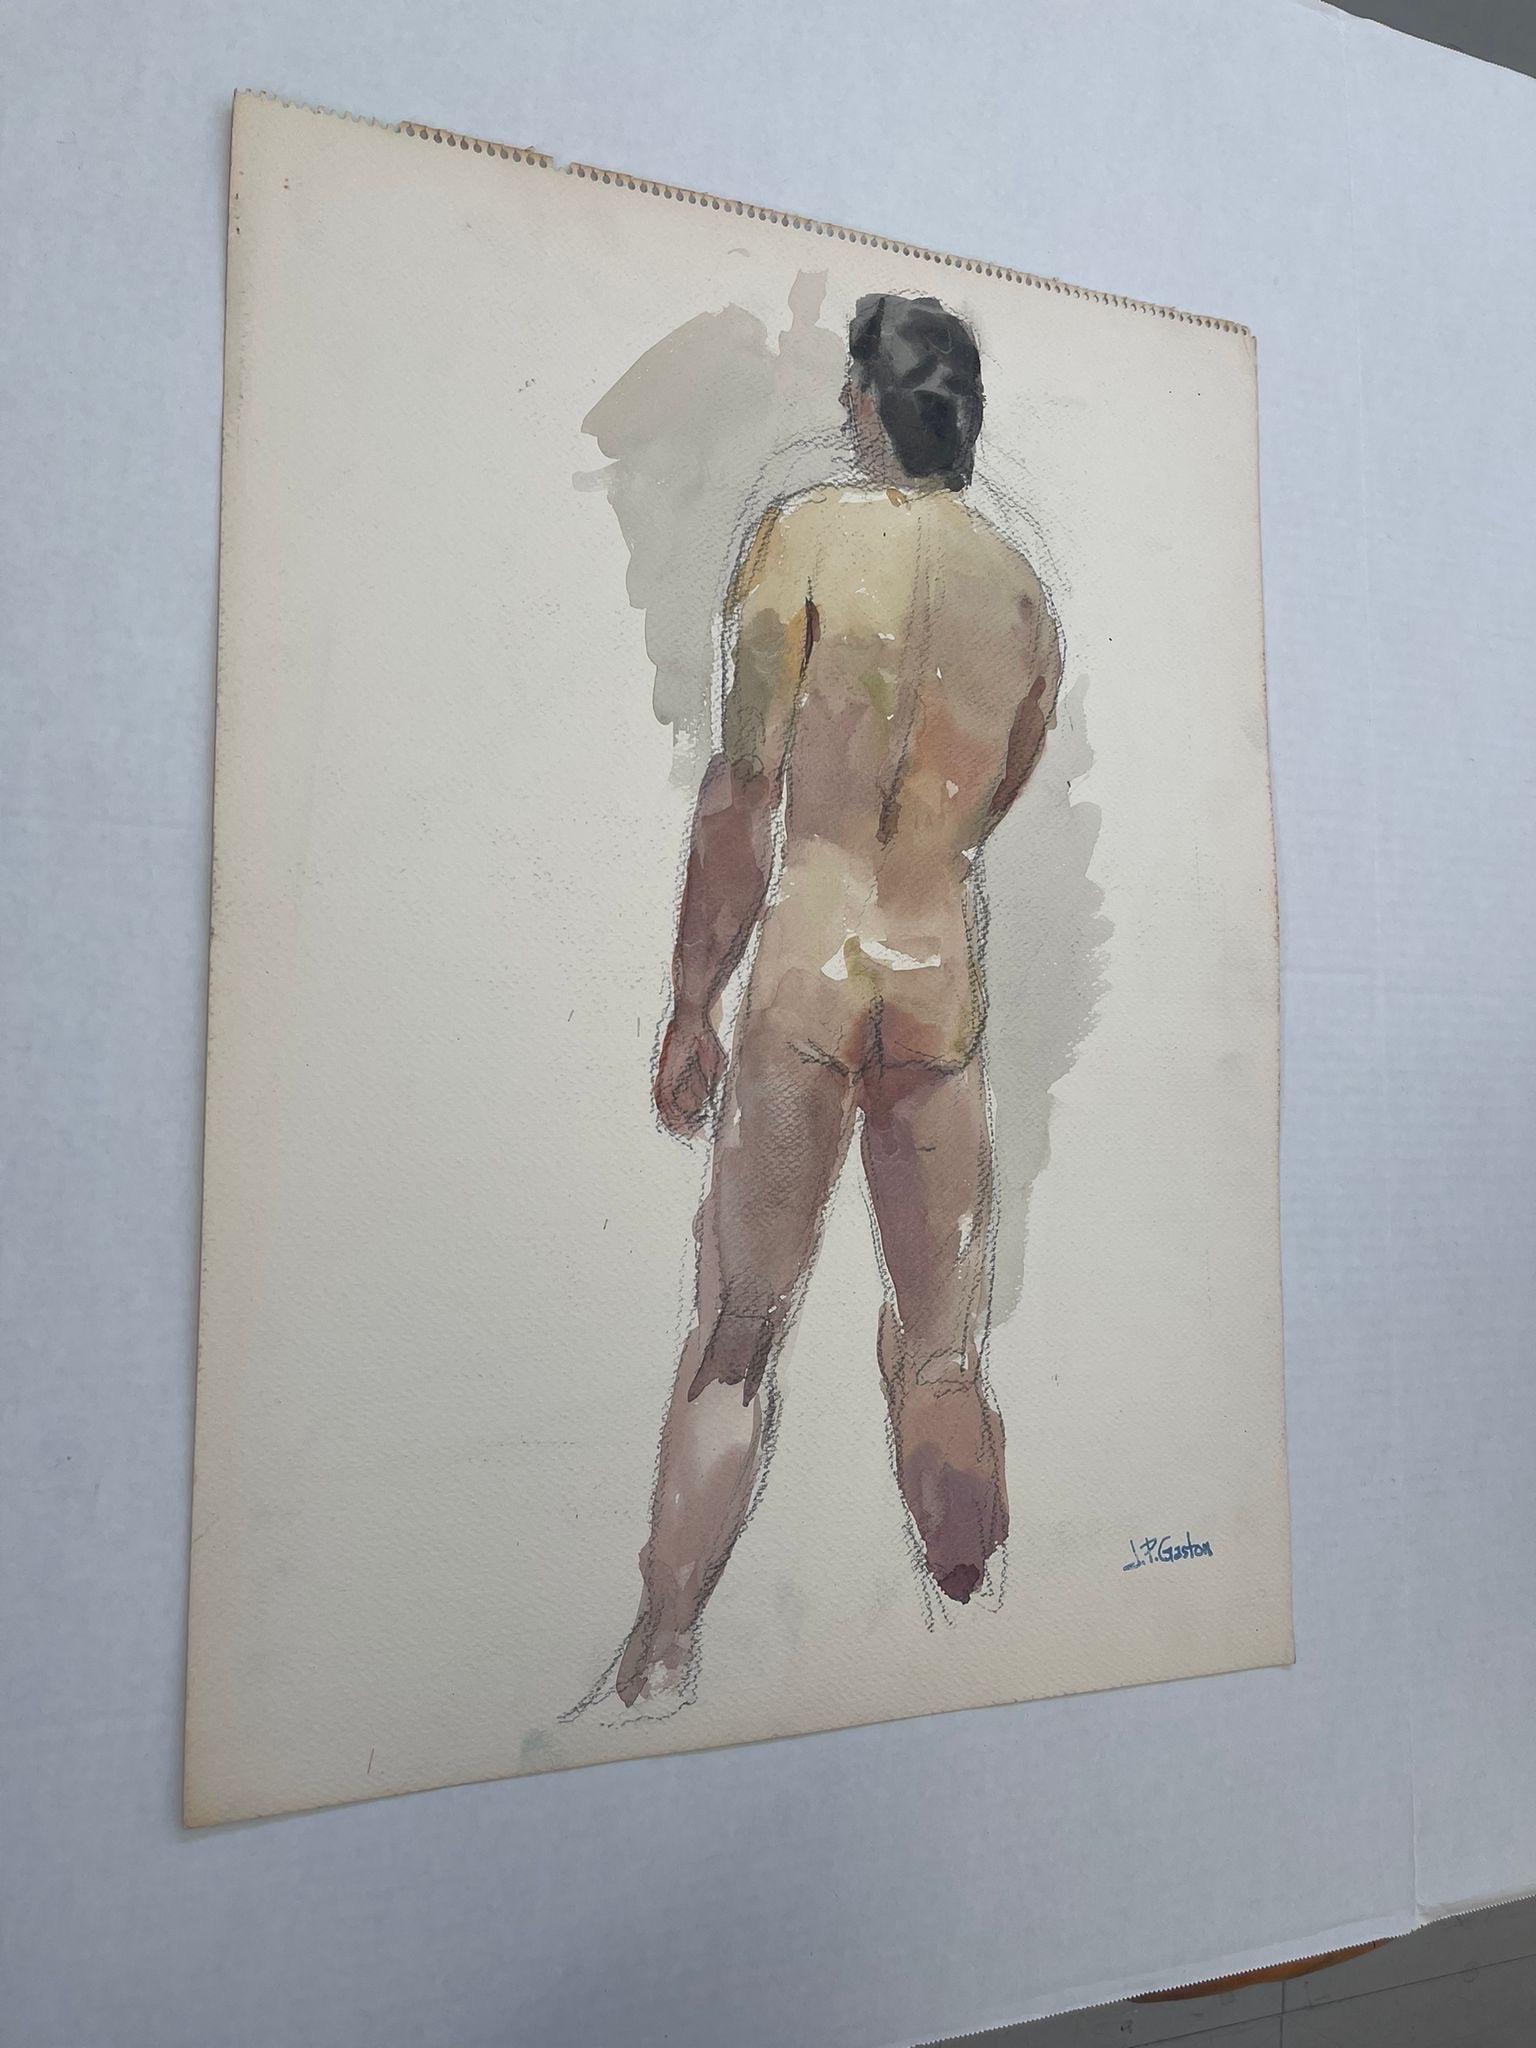 Abstract Portrait of the Backside of a Nude Man. Possibly Watercolor and Pastel on Paper. Signed J.P. Gaston as Pictured. Vintage Condition Consistent with Age.

Dimensions. 18 W ; 1/8 D ; 24H